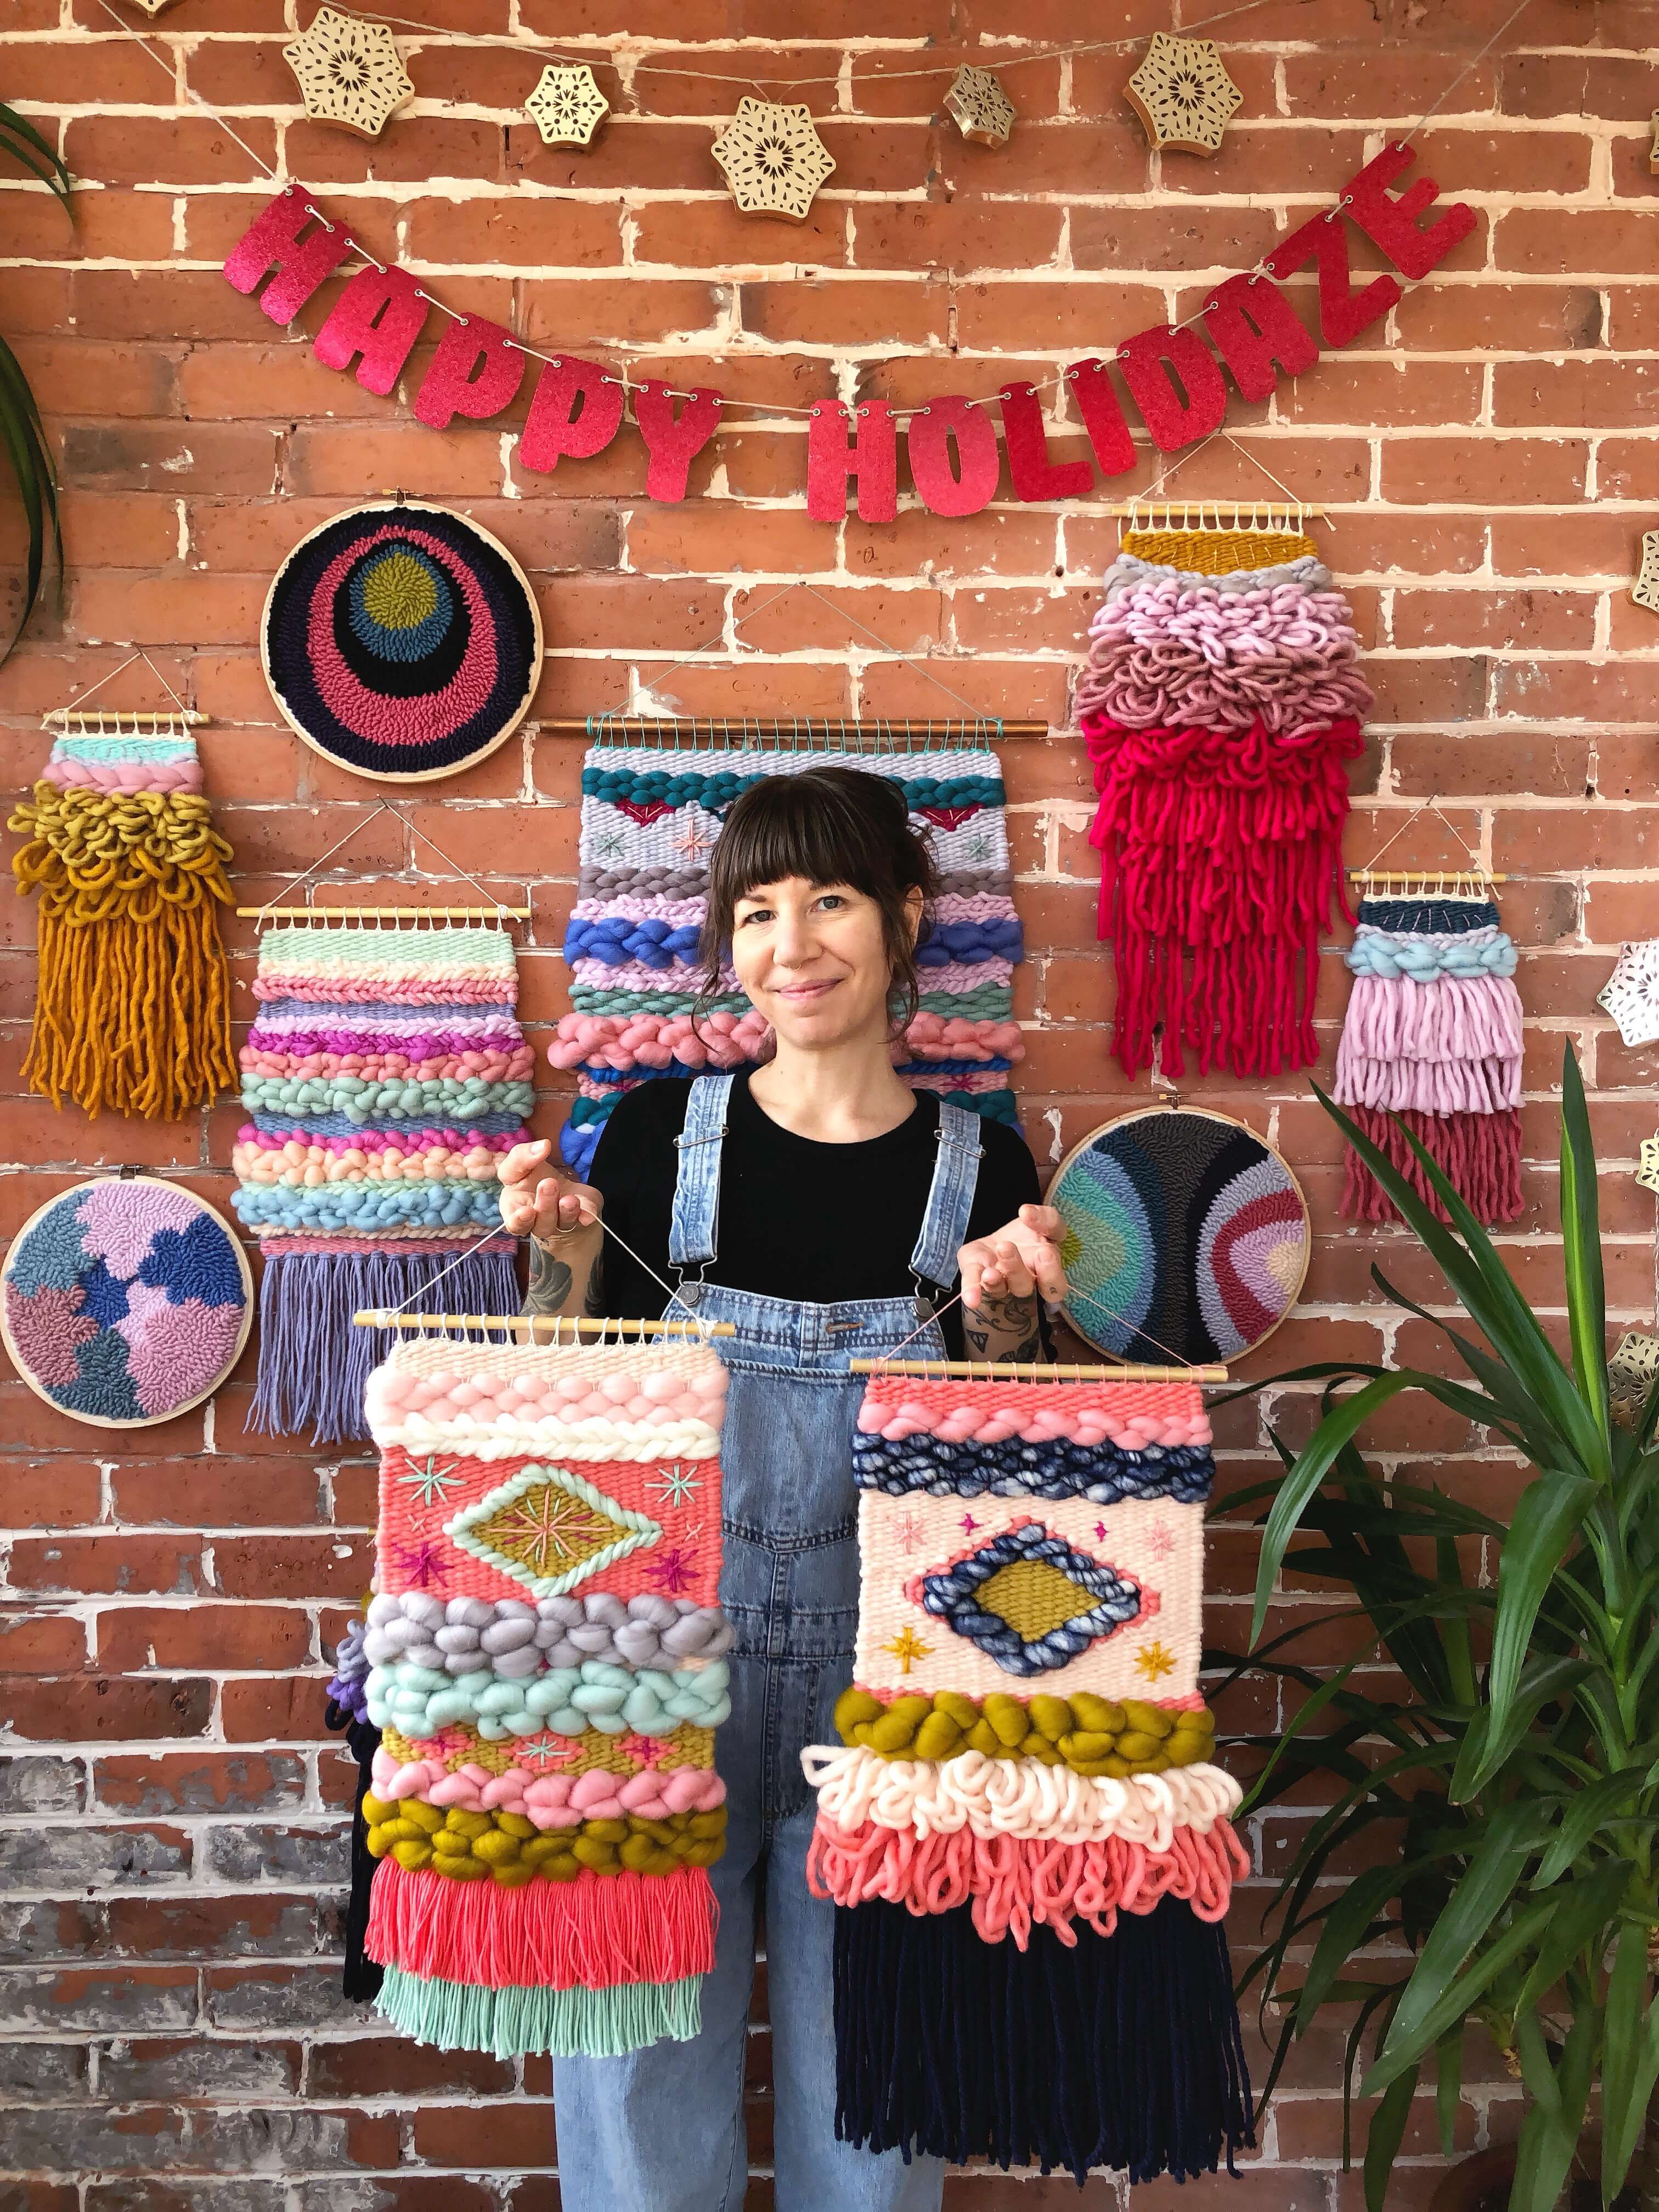 A woman poses with her macrame wall hangings of different sizes and color schemes. She's holding one wall hanging in each hand, and stands in front of a brick wall where several other macrame wall hangings of various shapes and sizes hang.